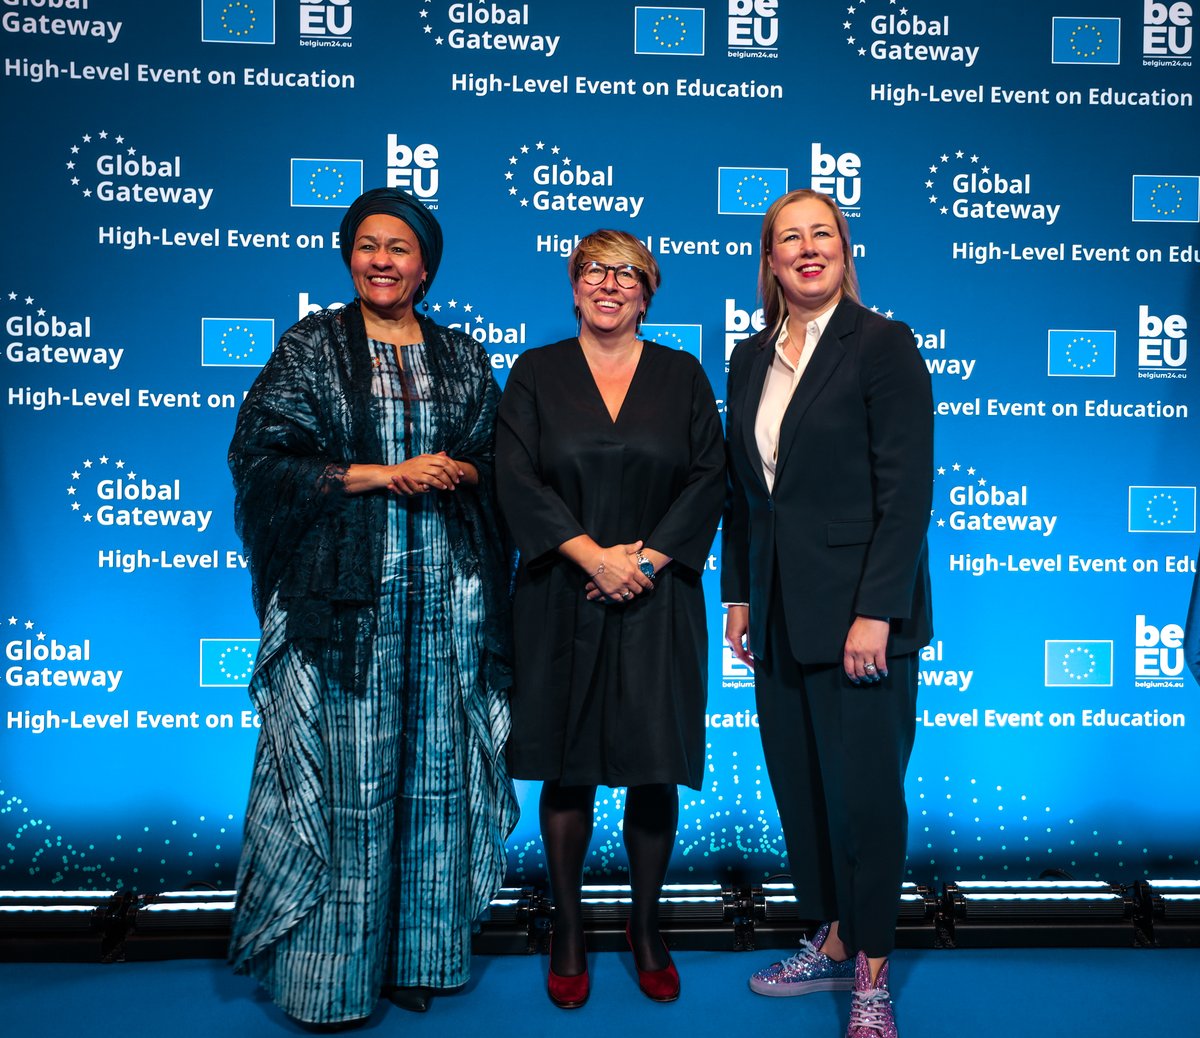 Education, especially for girls, remains the best investment to achieve sustainable progress and prosperity. Looking forward to discussing challenges and solutions with @JuttaUrpilainen & @AminaJMohammed during #GlobalGateway Education Forum.